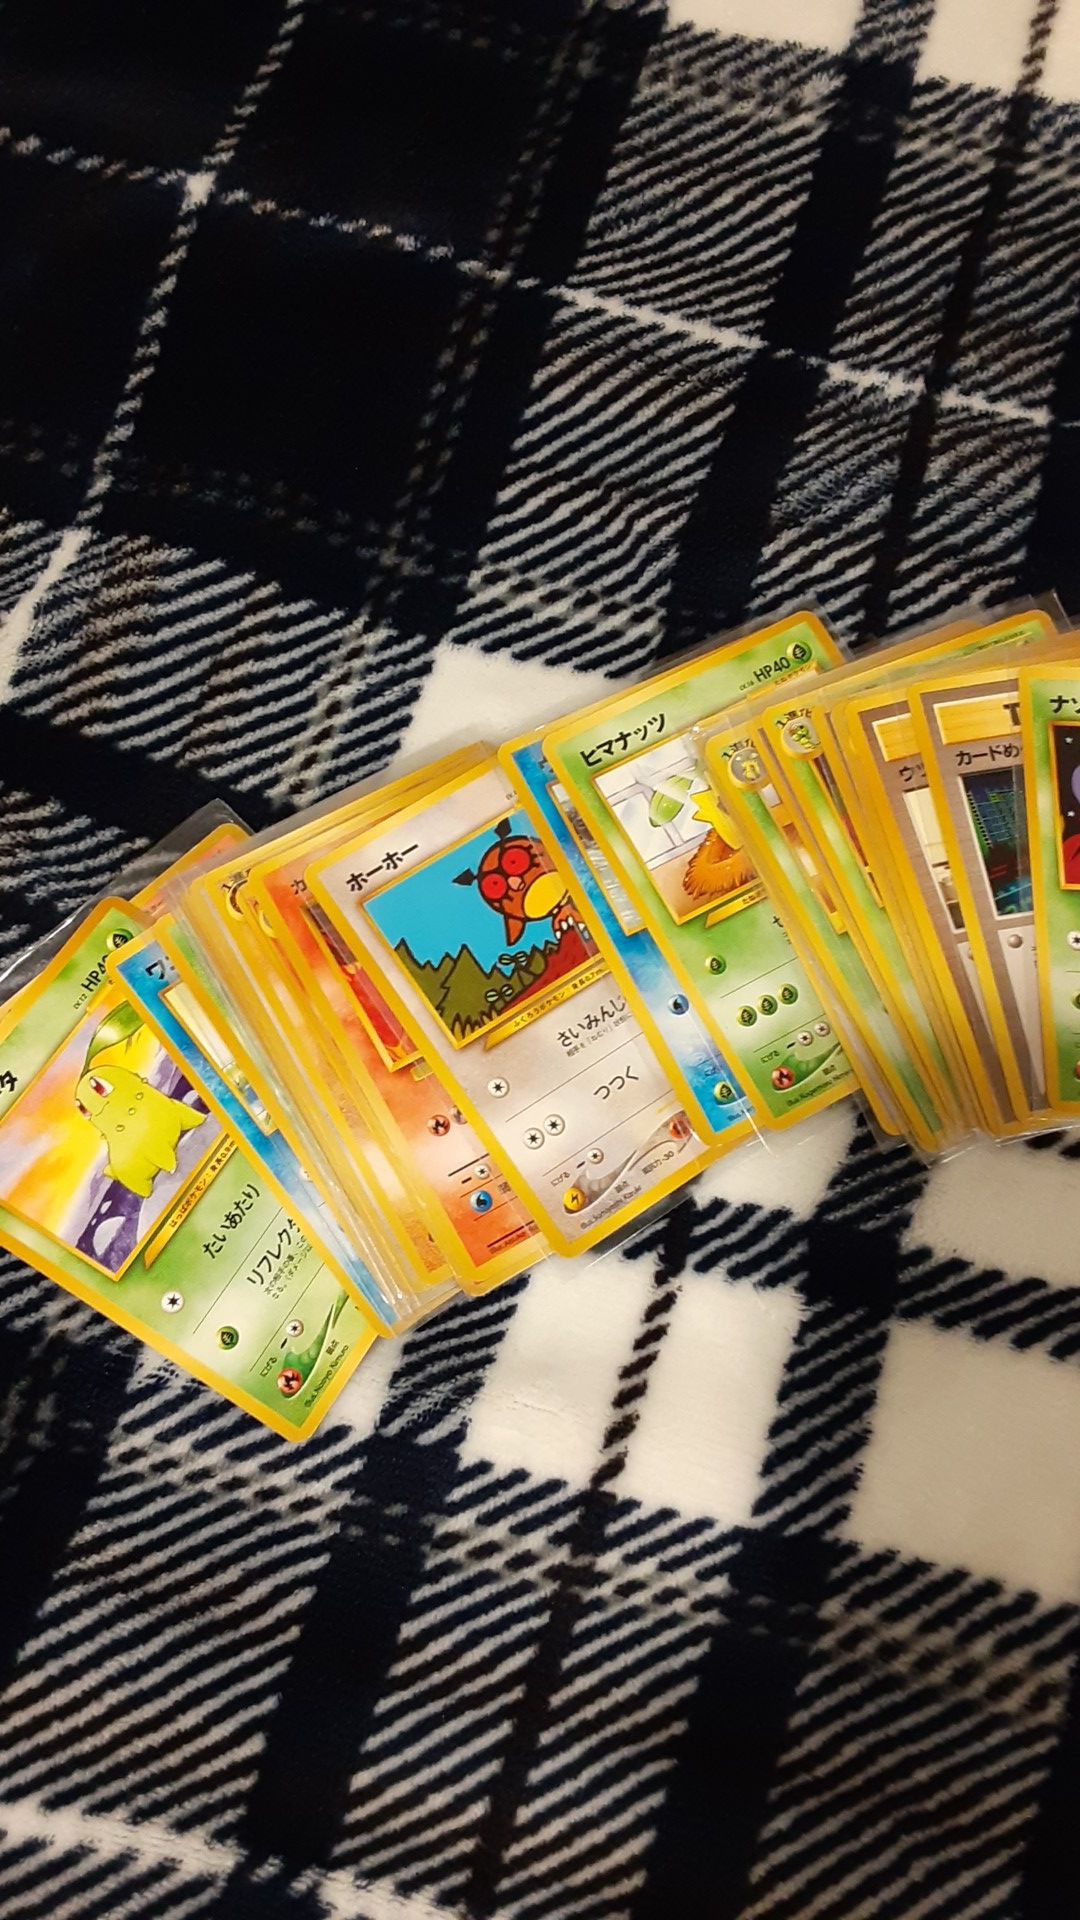 Pokemon cards in another language